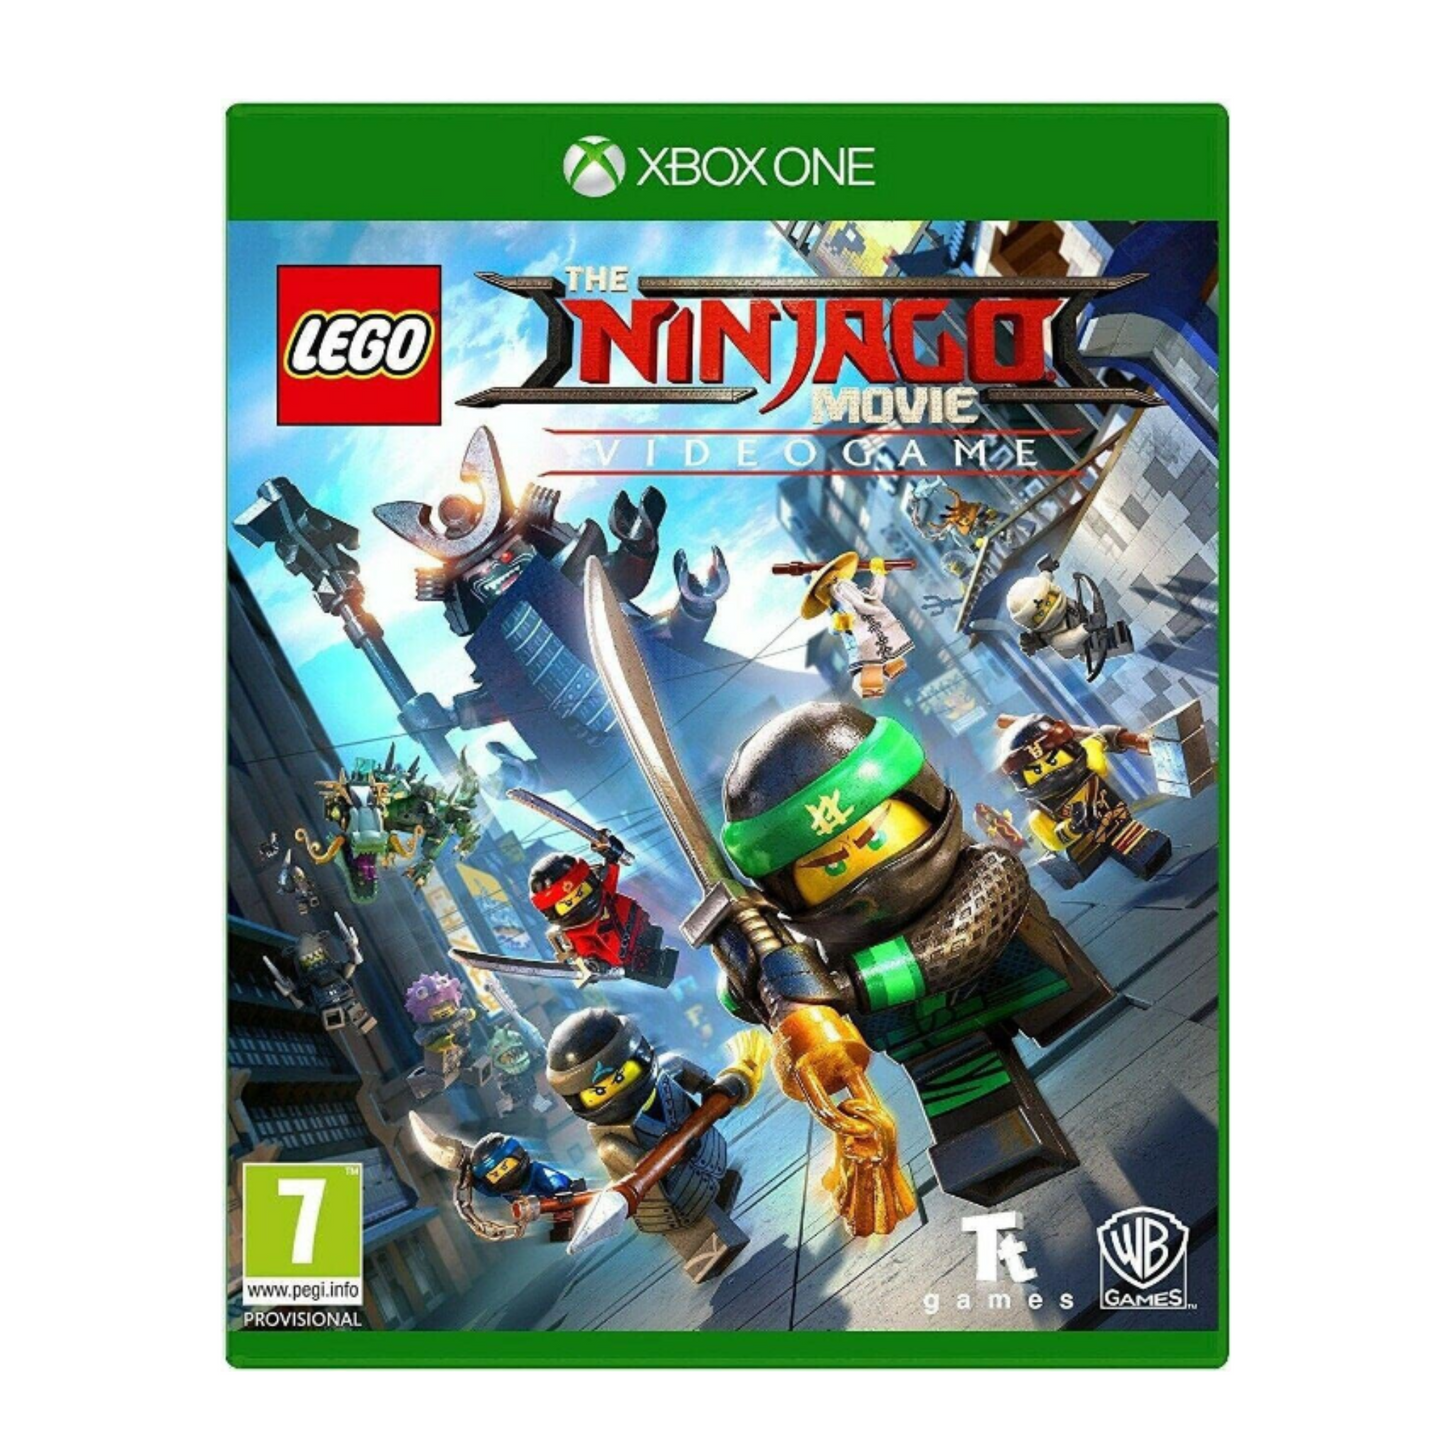 Lego The Ninjago Movie Video Game for XBox One